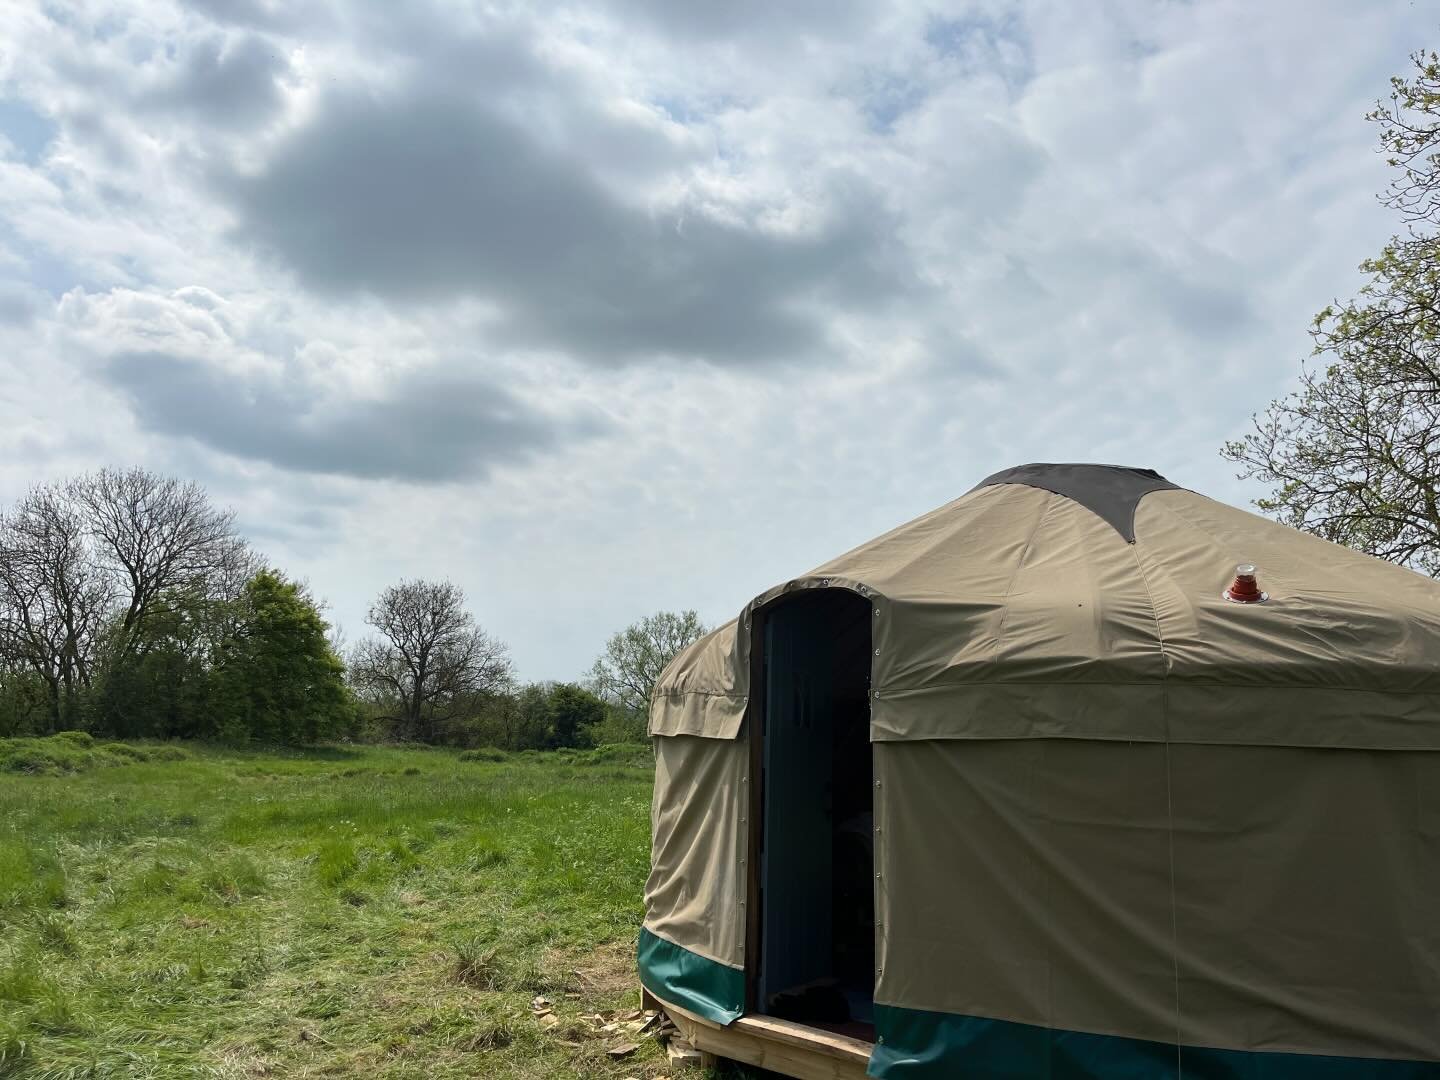 We have a #yurt up!! #botswicky is drying up with this #glorioussunshine and things are moving ever closer to opening up #glamping #nature #ecotourism #naturalcamping #yurtlife #wiltshire #nordicglamping